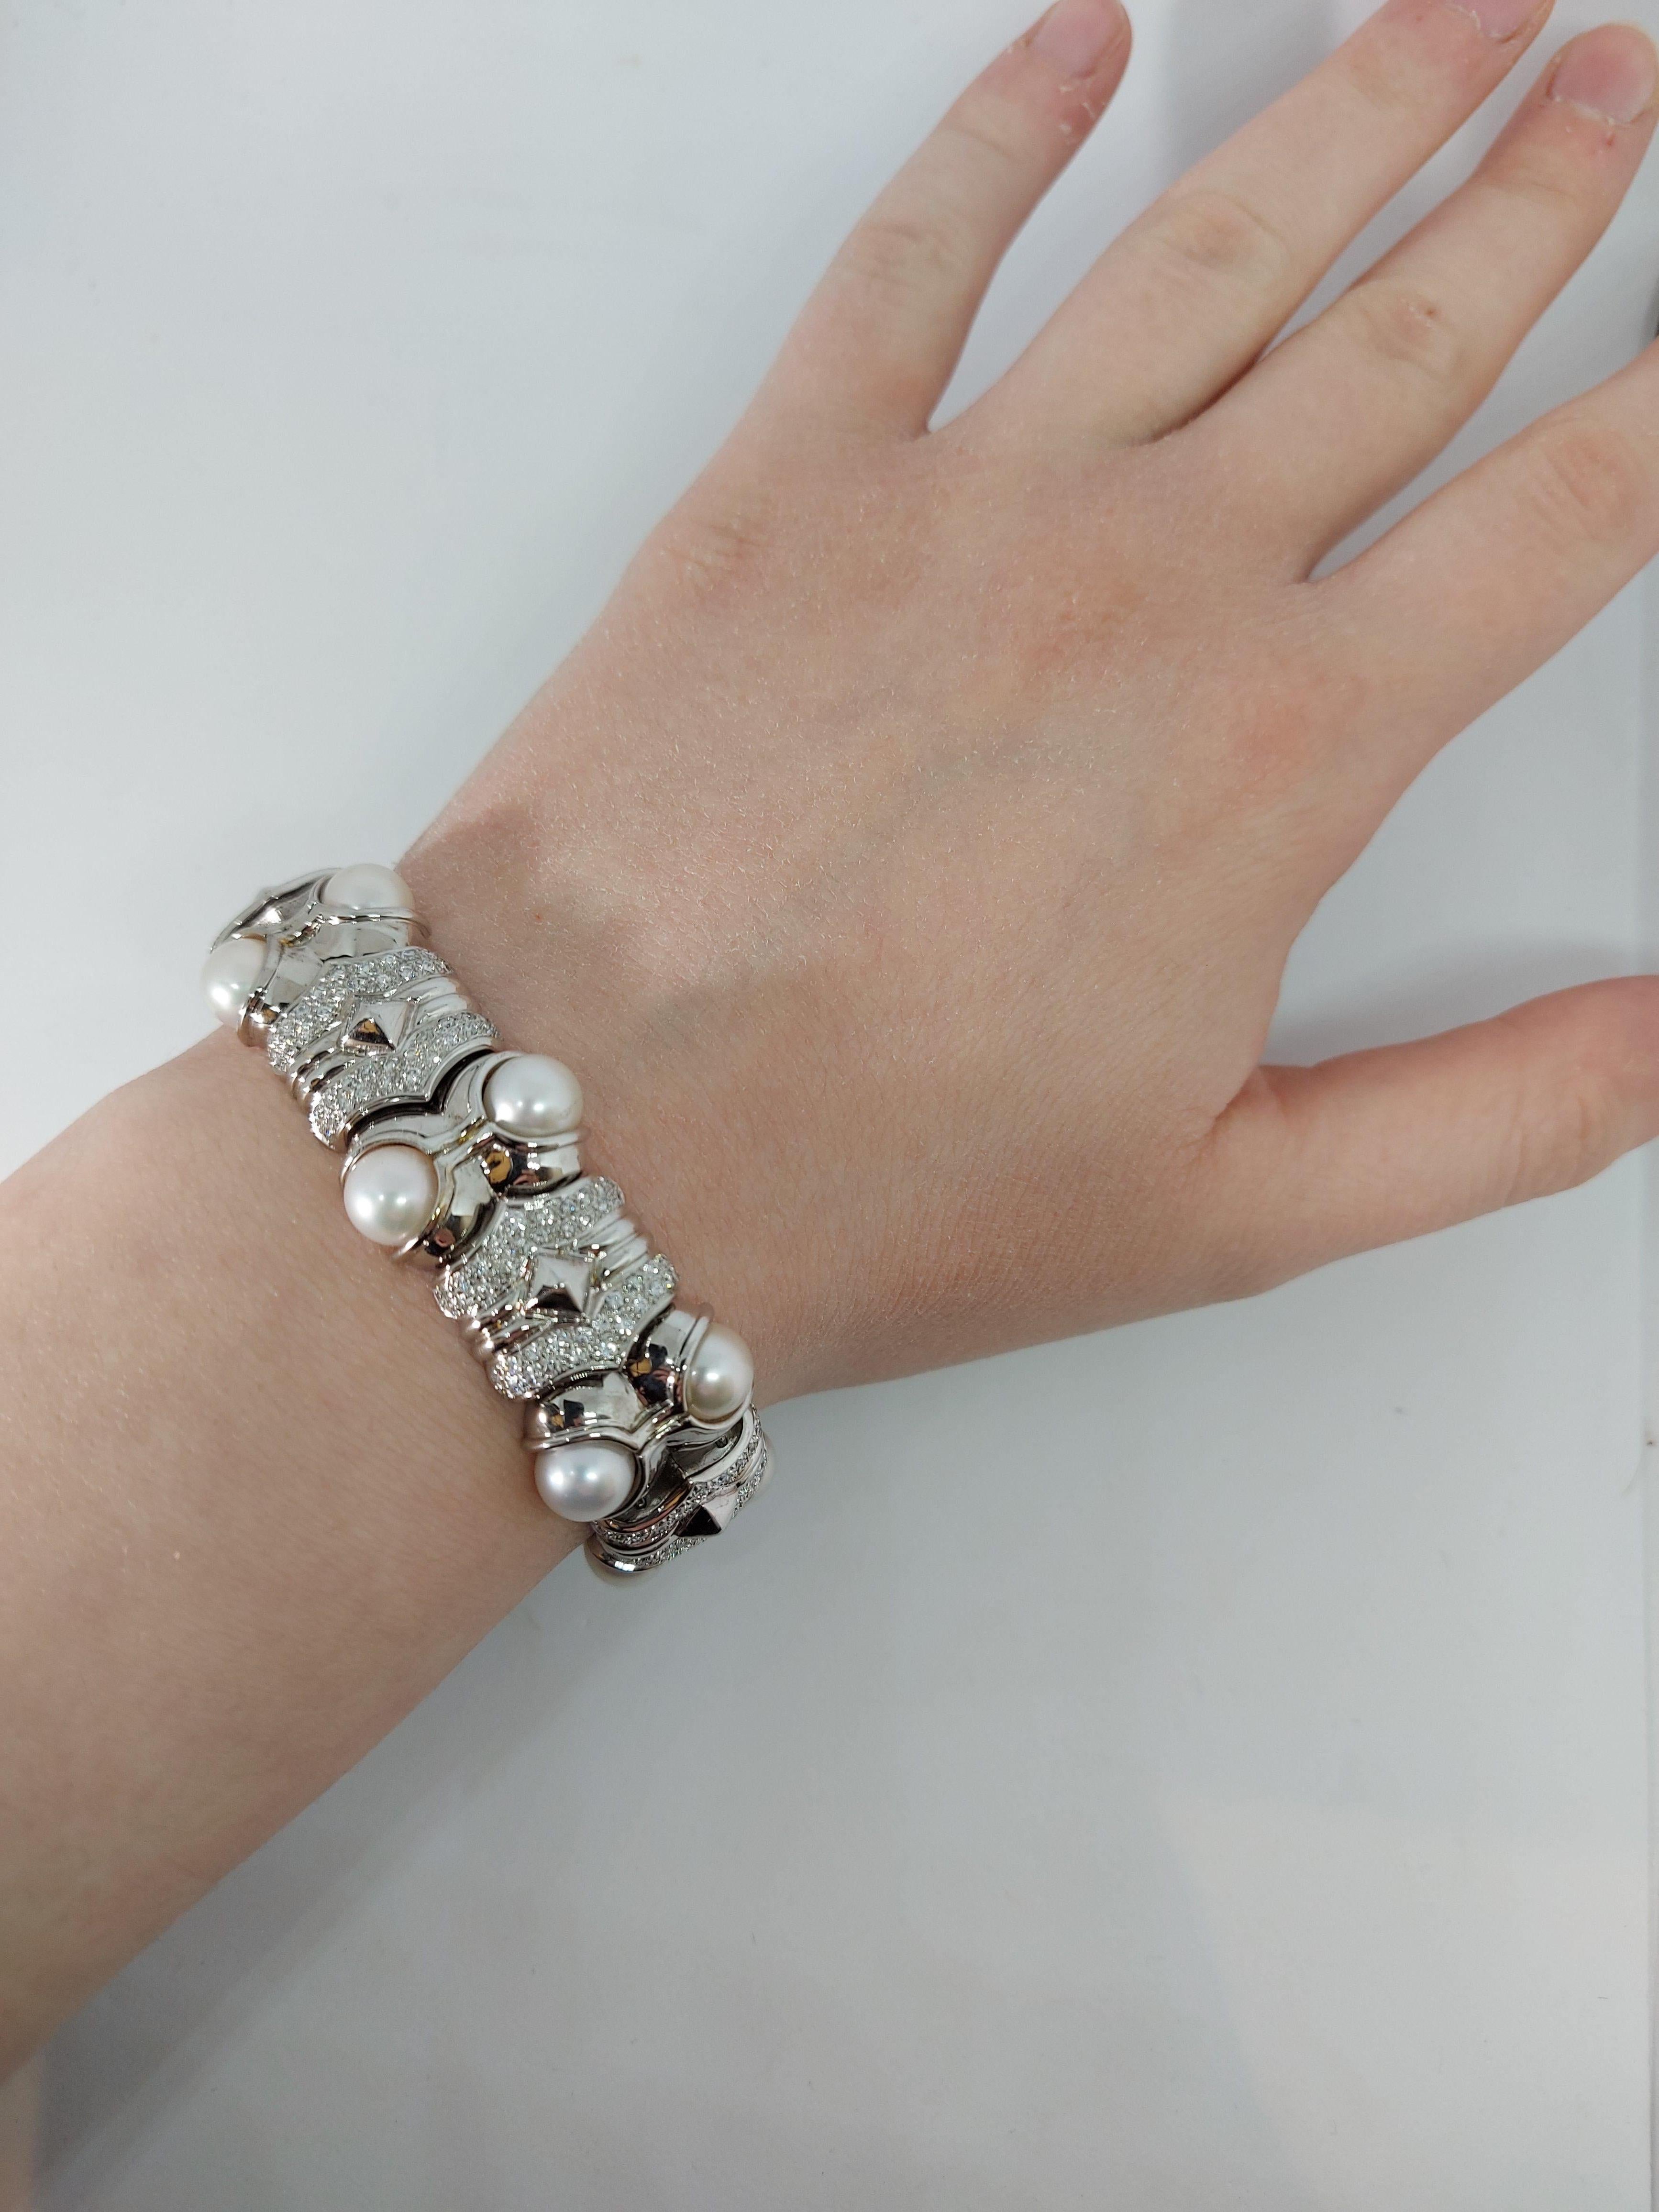 18 Karat White Gold Bracelet with Brilliant Cut Diamonds and Pearls For Sale 10